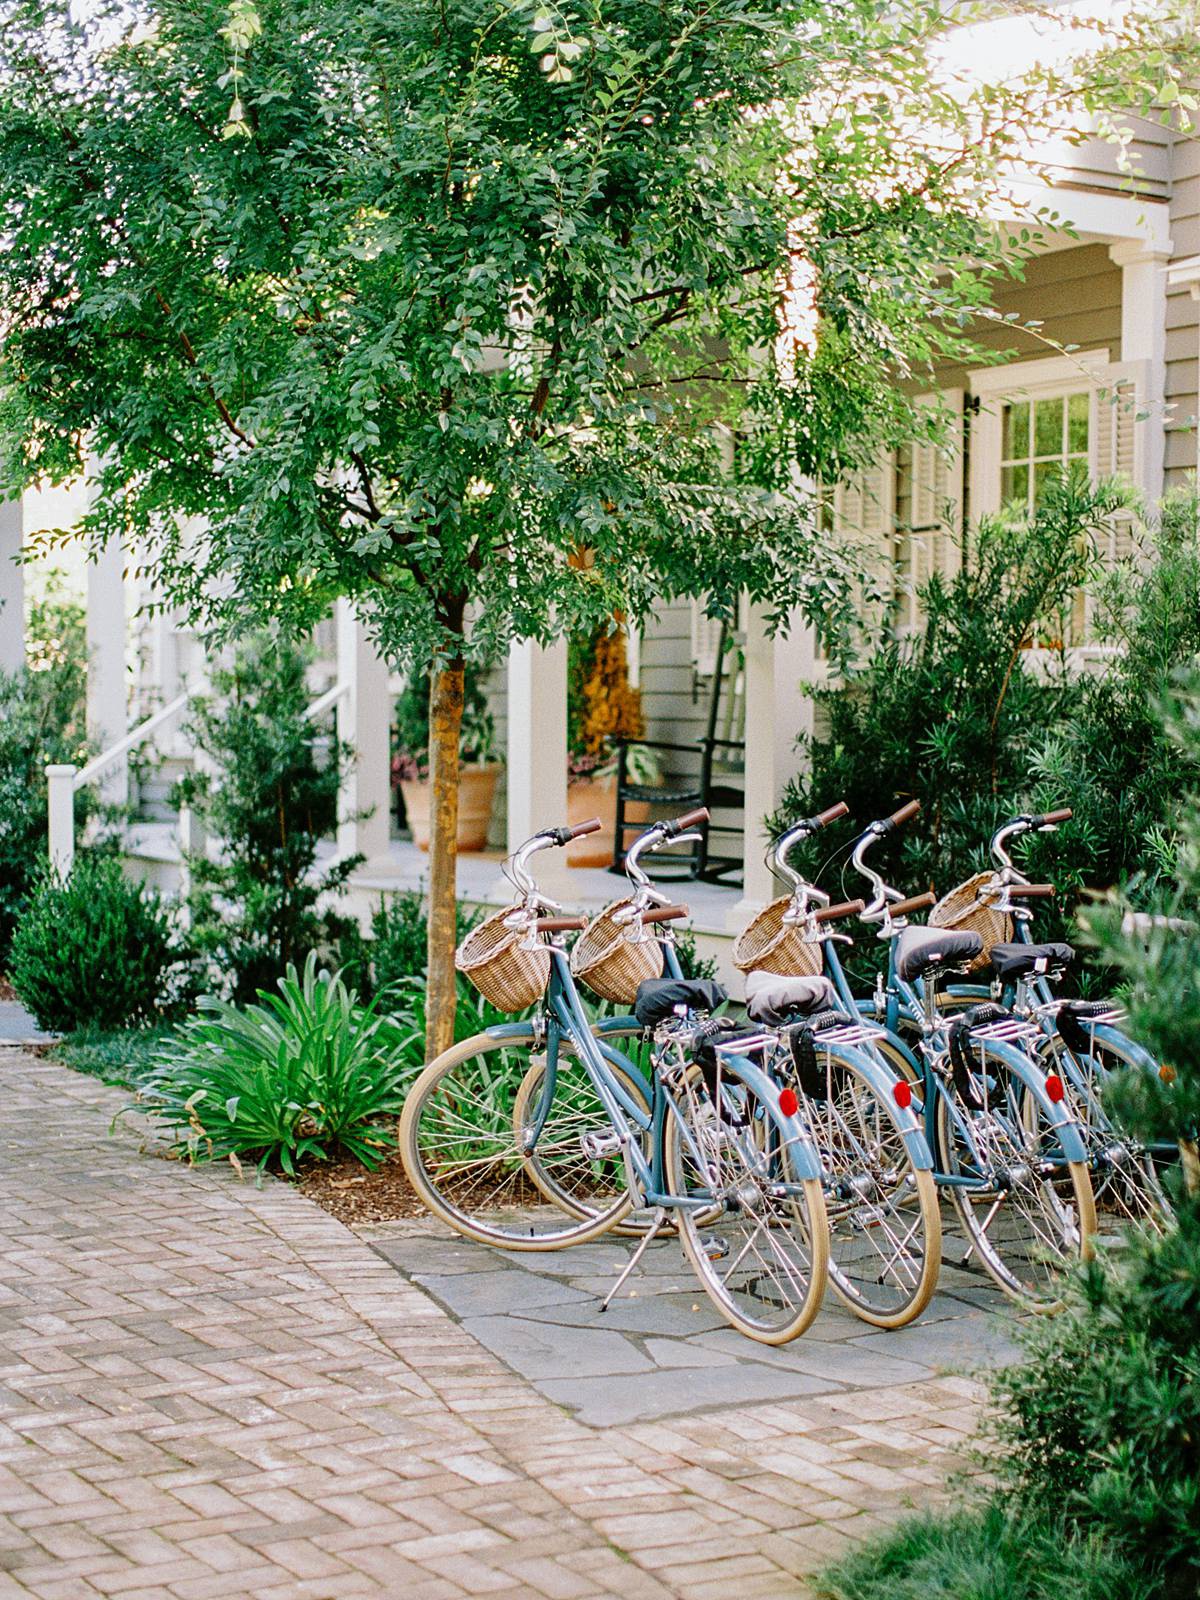 86 cannon charleston wedding venue bride getting ready hotel downtown with vintage bikes and courtyard